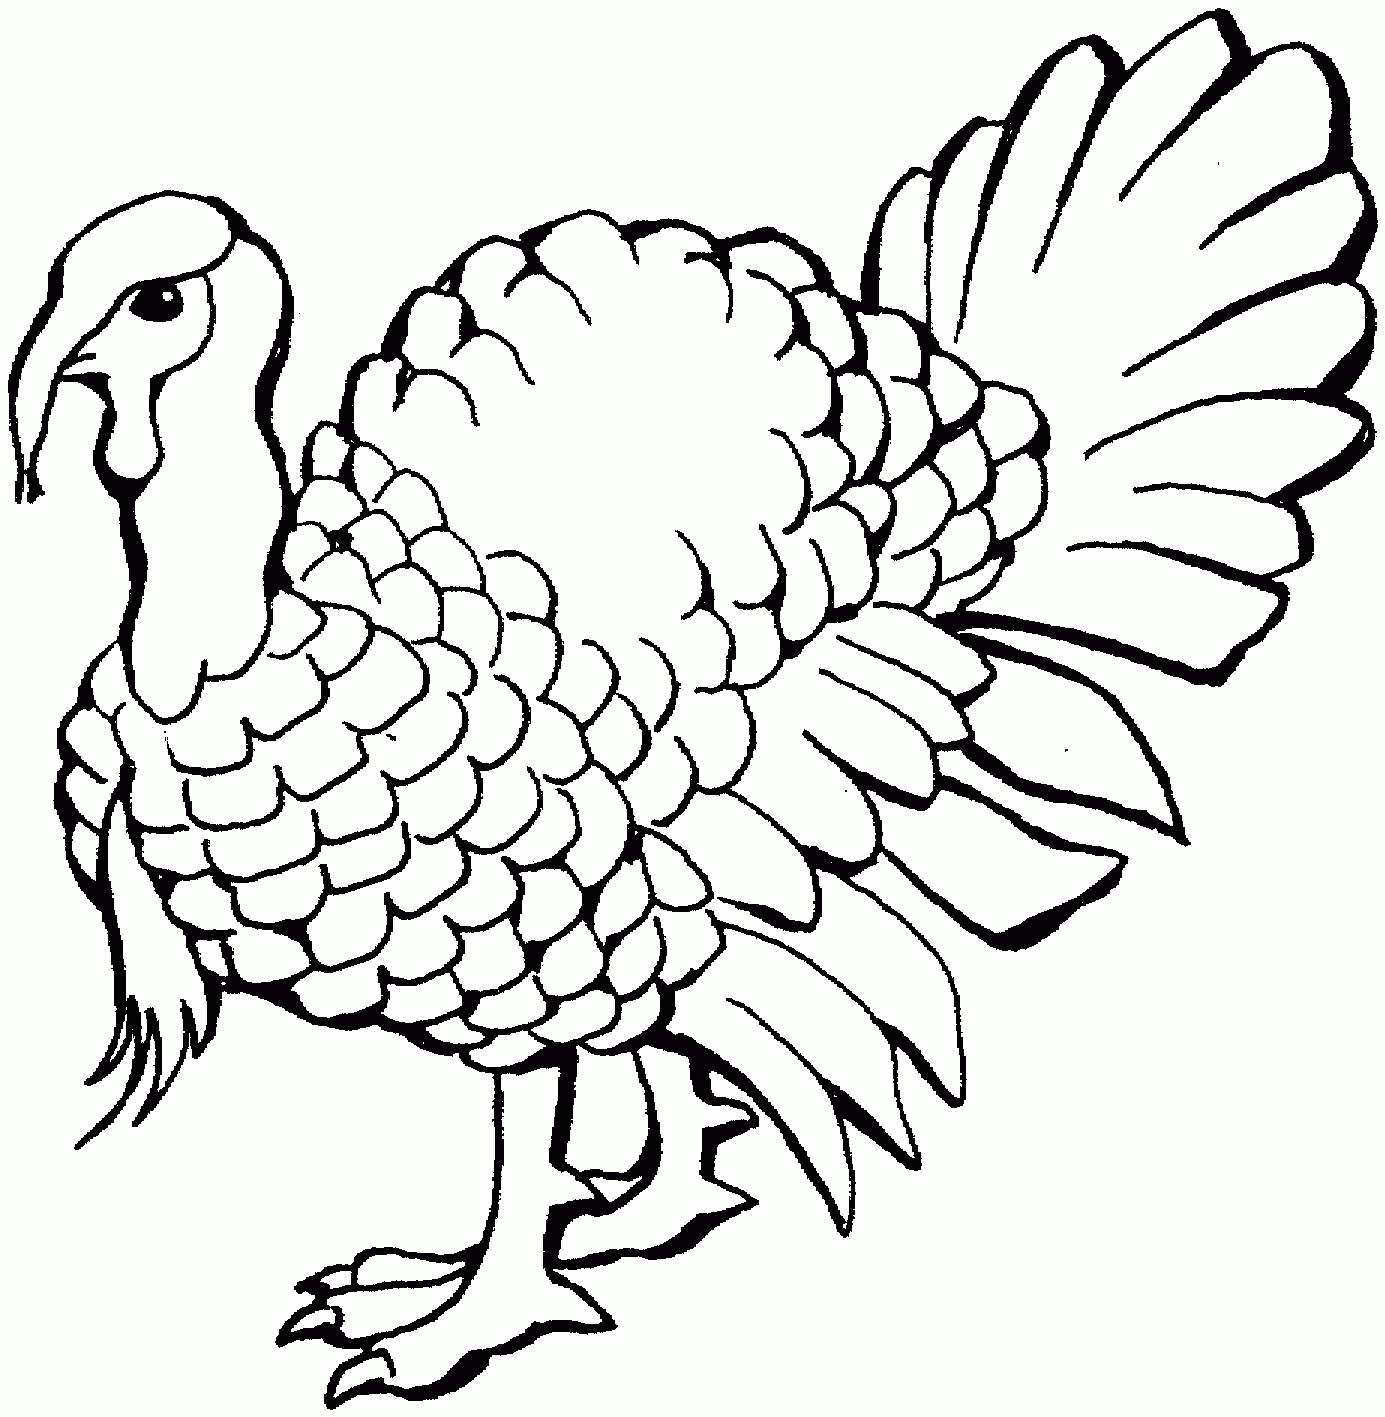 Free Printable Turkey Coloring Pages For Kids - Free Printable Pictures Of Turkeys To Color